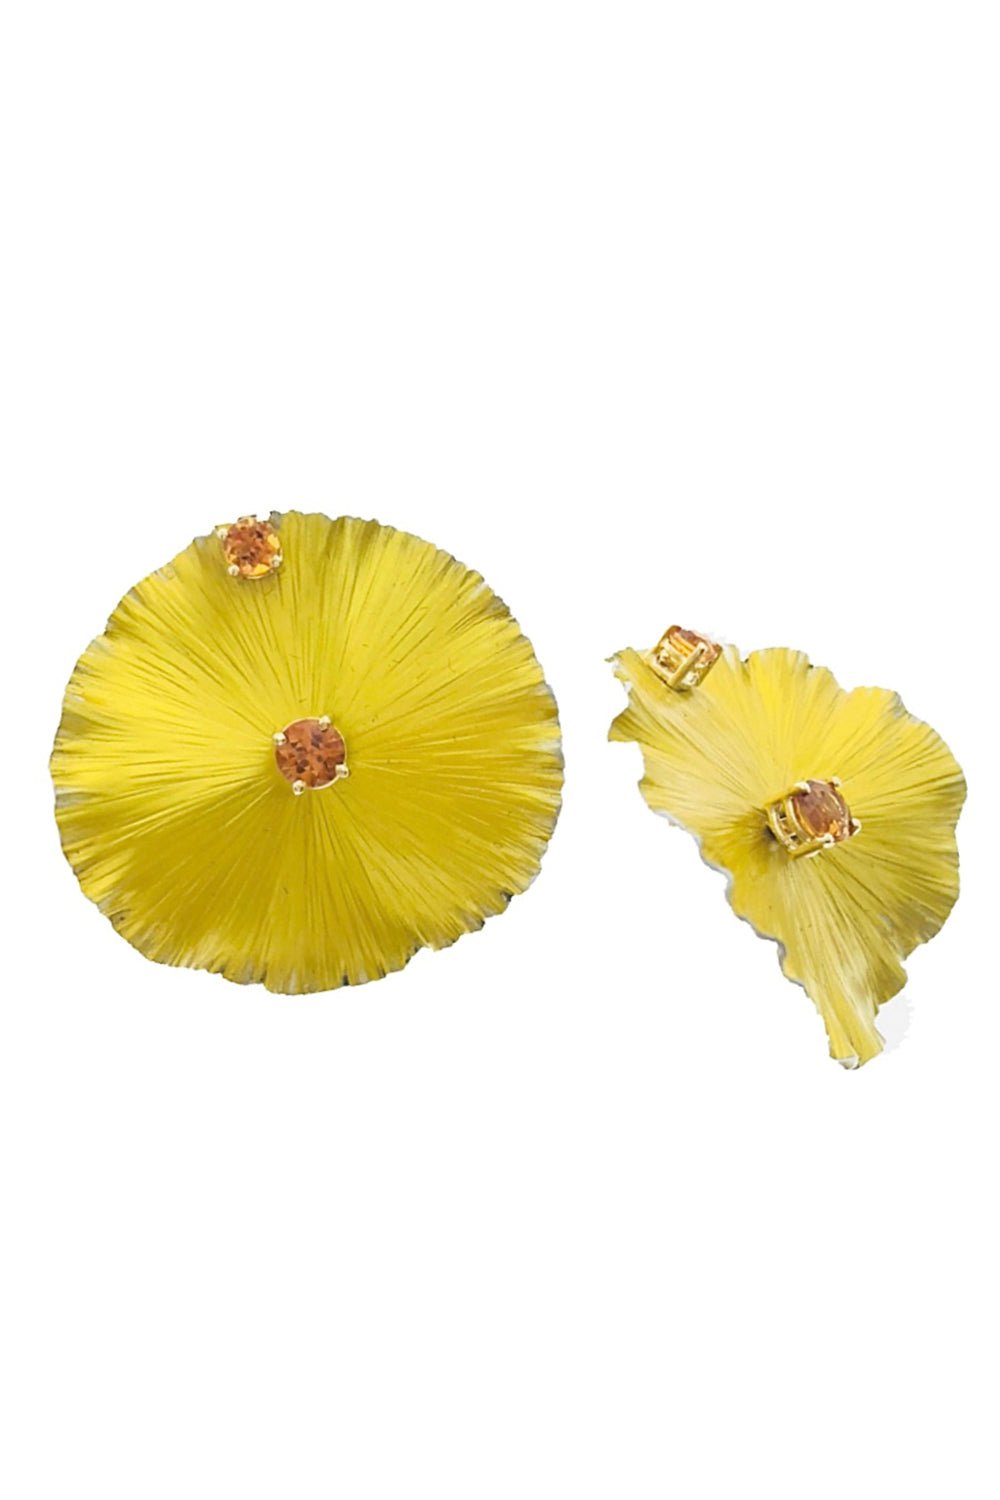 CASA CASTRO-Large Citrine Mother Nature Earrings-YELLOW GOLD